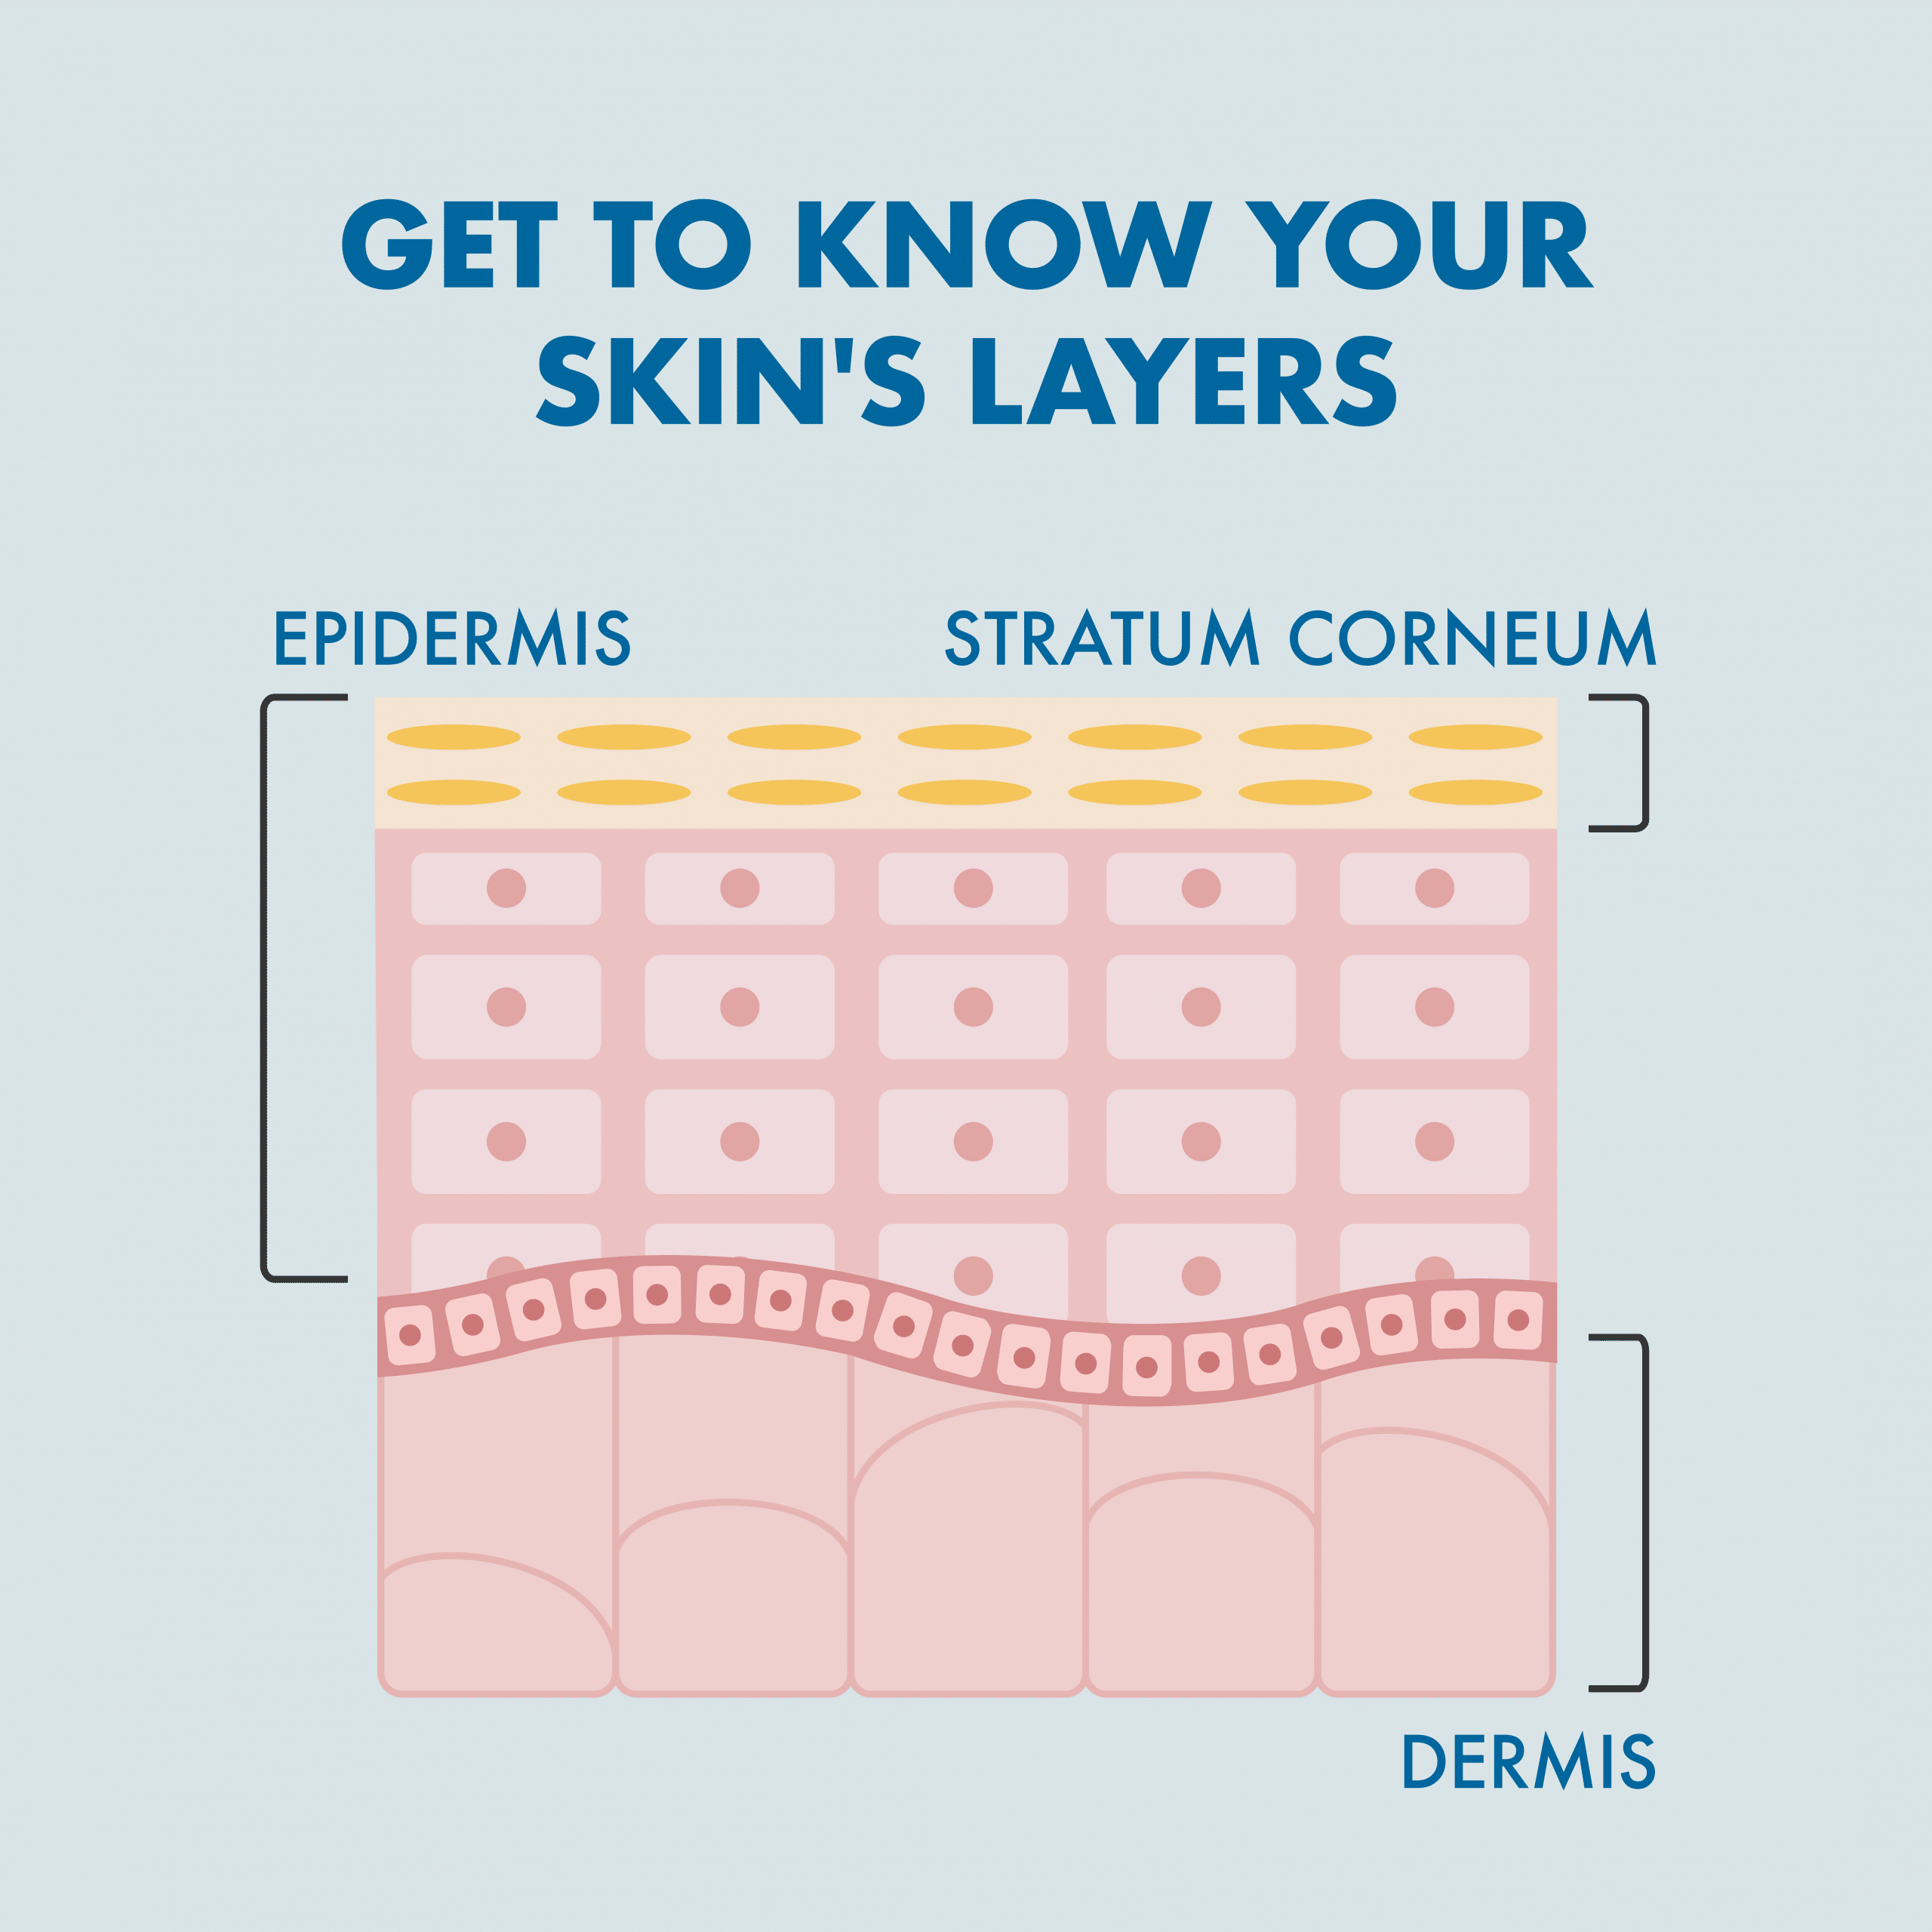 Get to know the skin's layers of the skin barrier